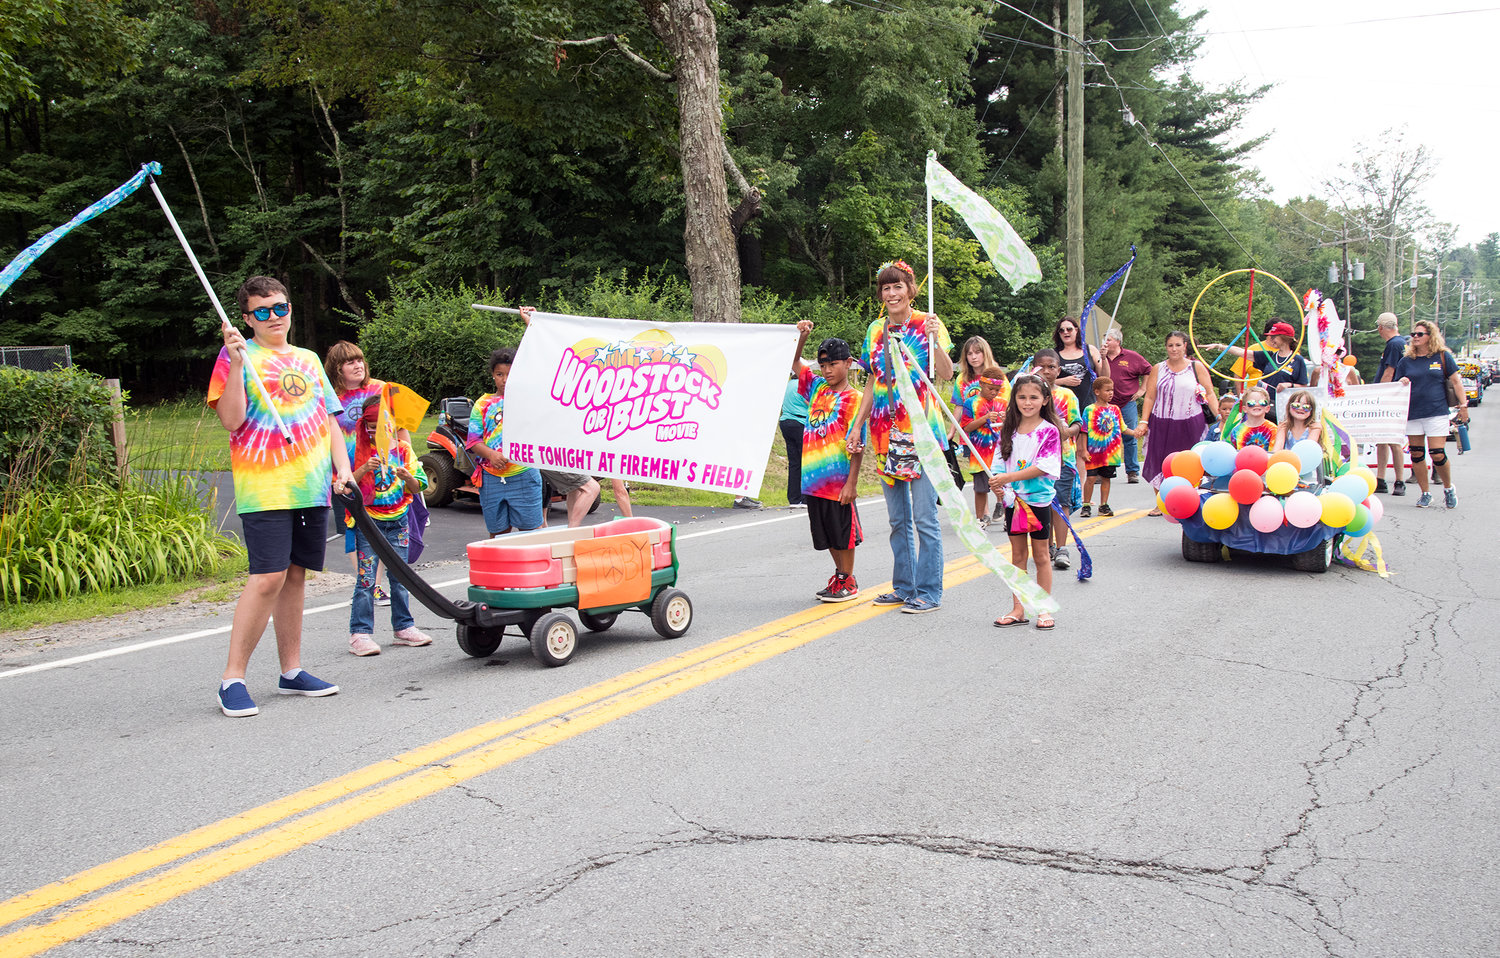 Bethel Parks & Recreation Director, Cathy McFadden and, Tracy Kanyok from the Town’s summer camp, the town’s kids march with banners and a homemade float.